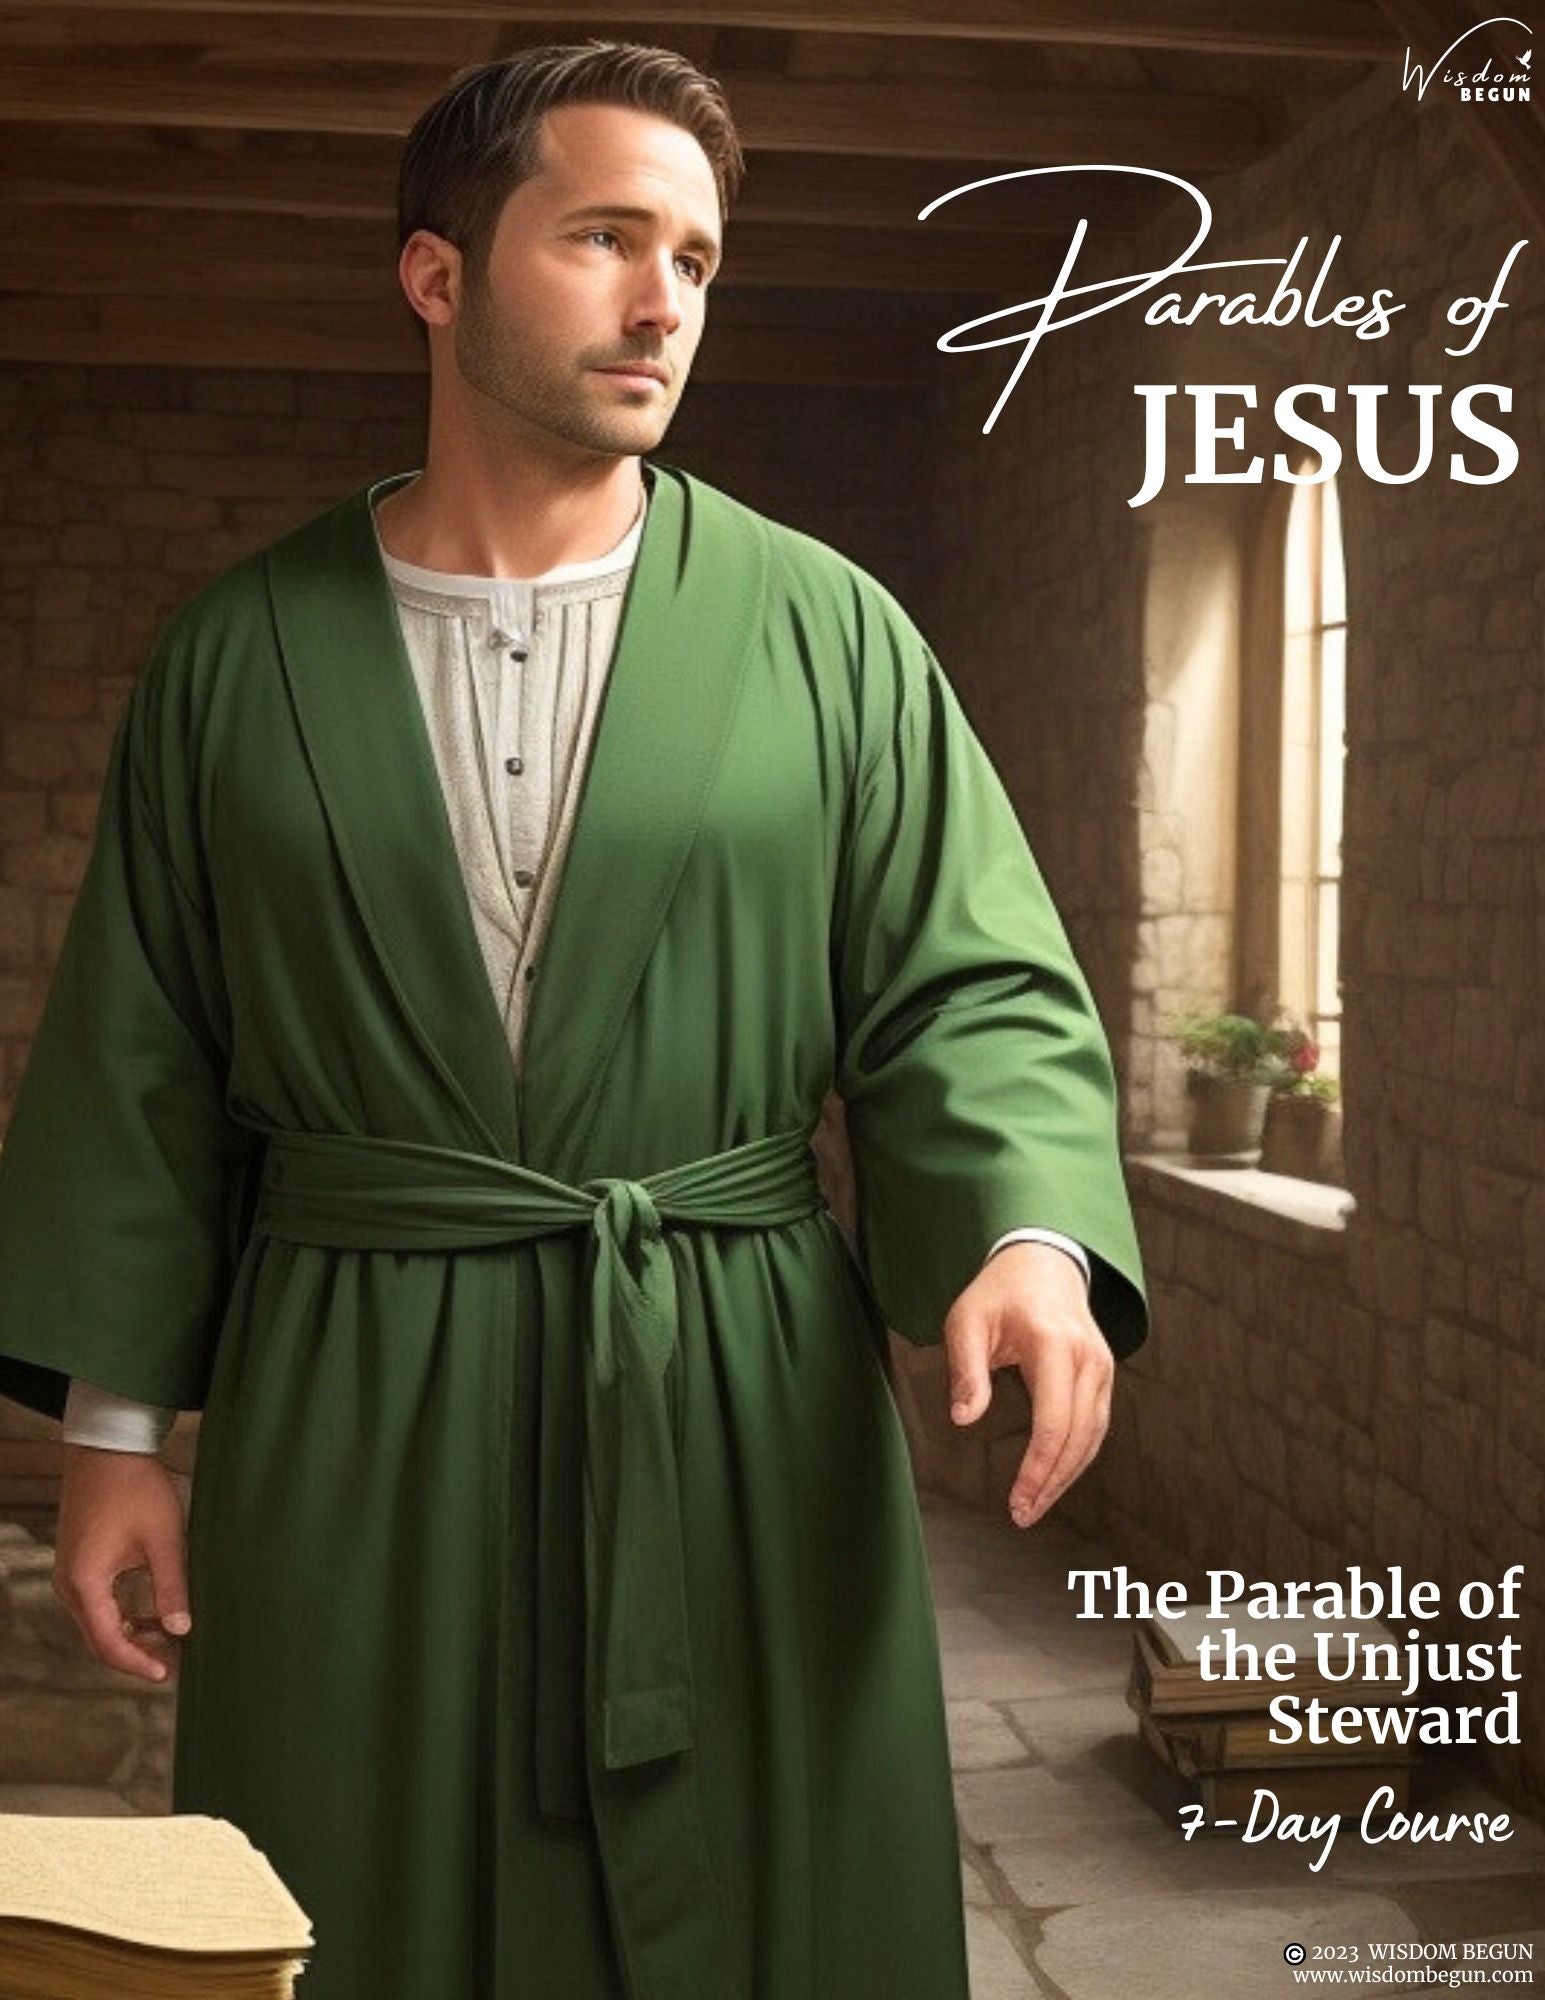 Parables of Jesus 7-Day Course: The Unjust Steward